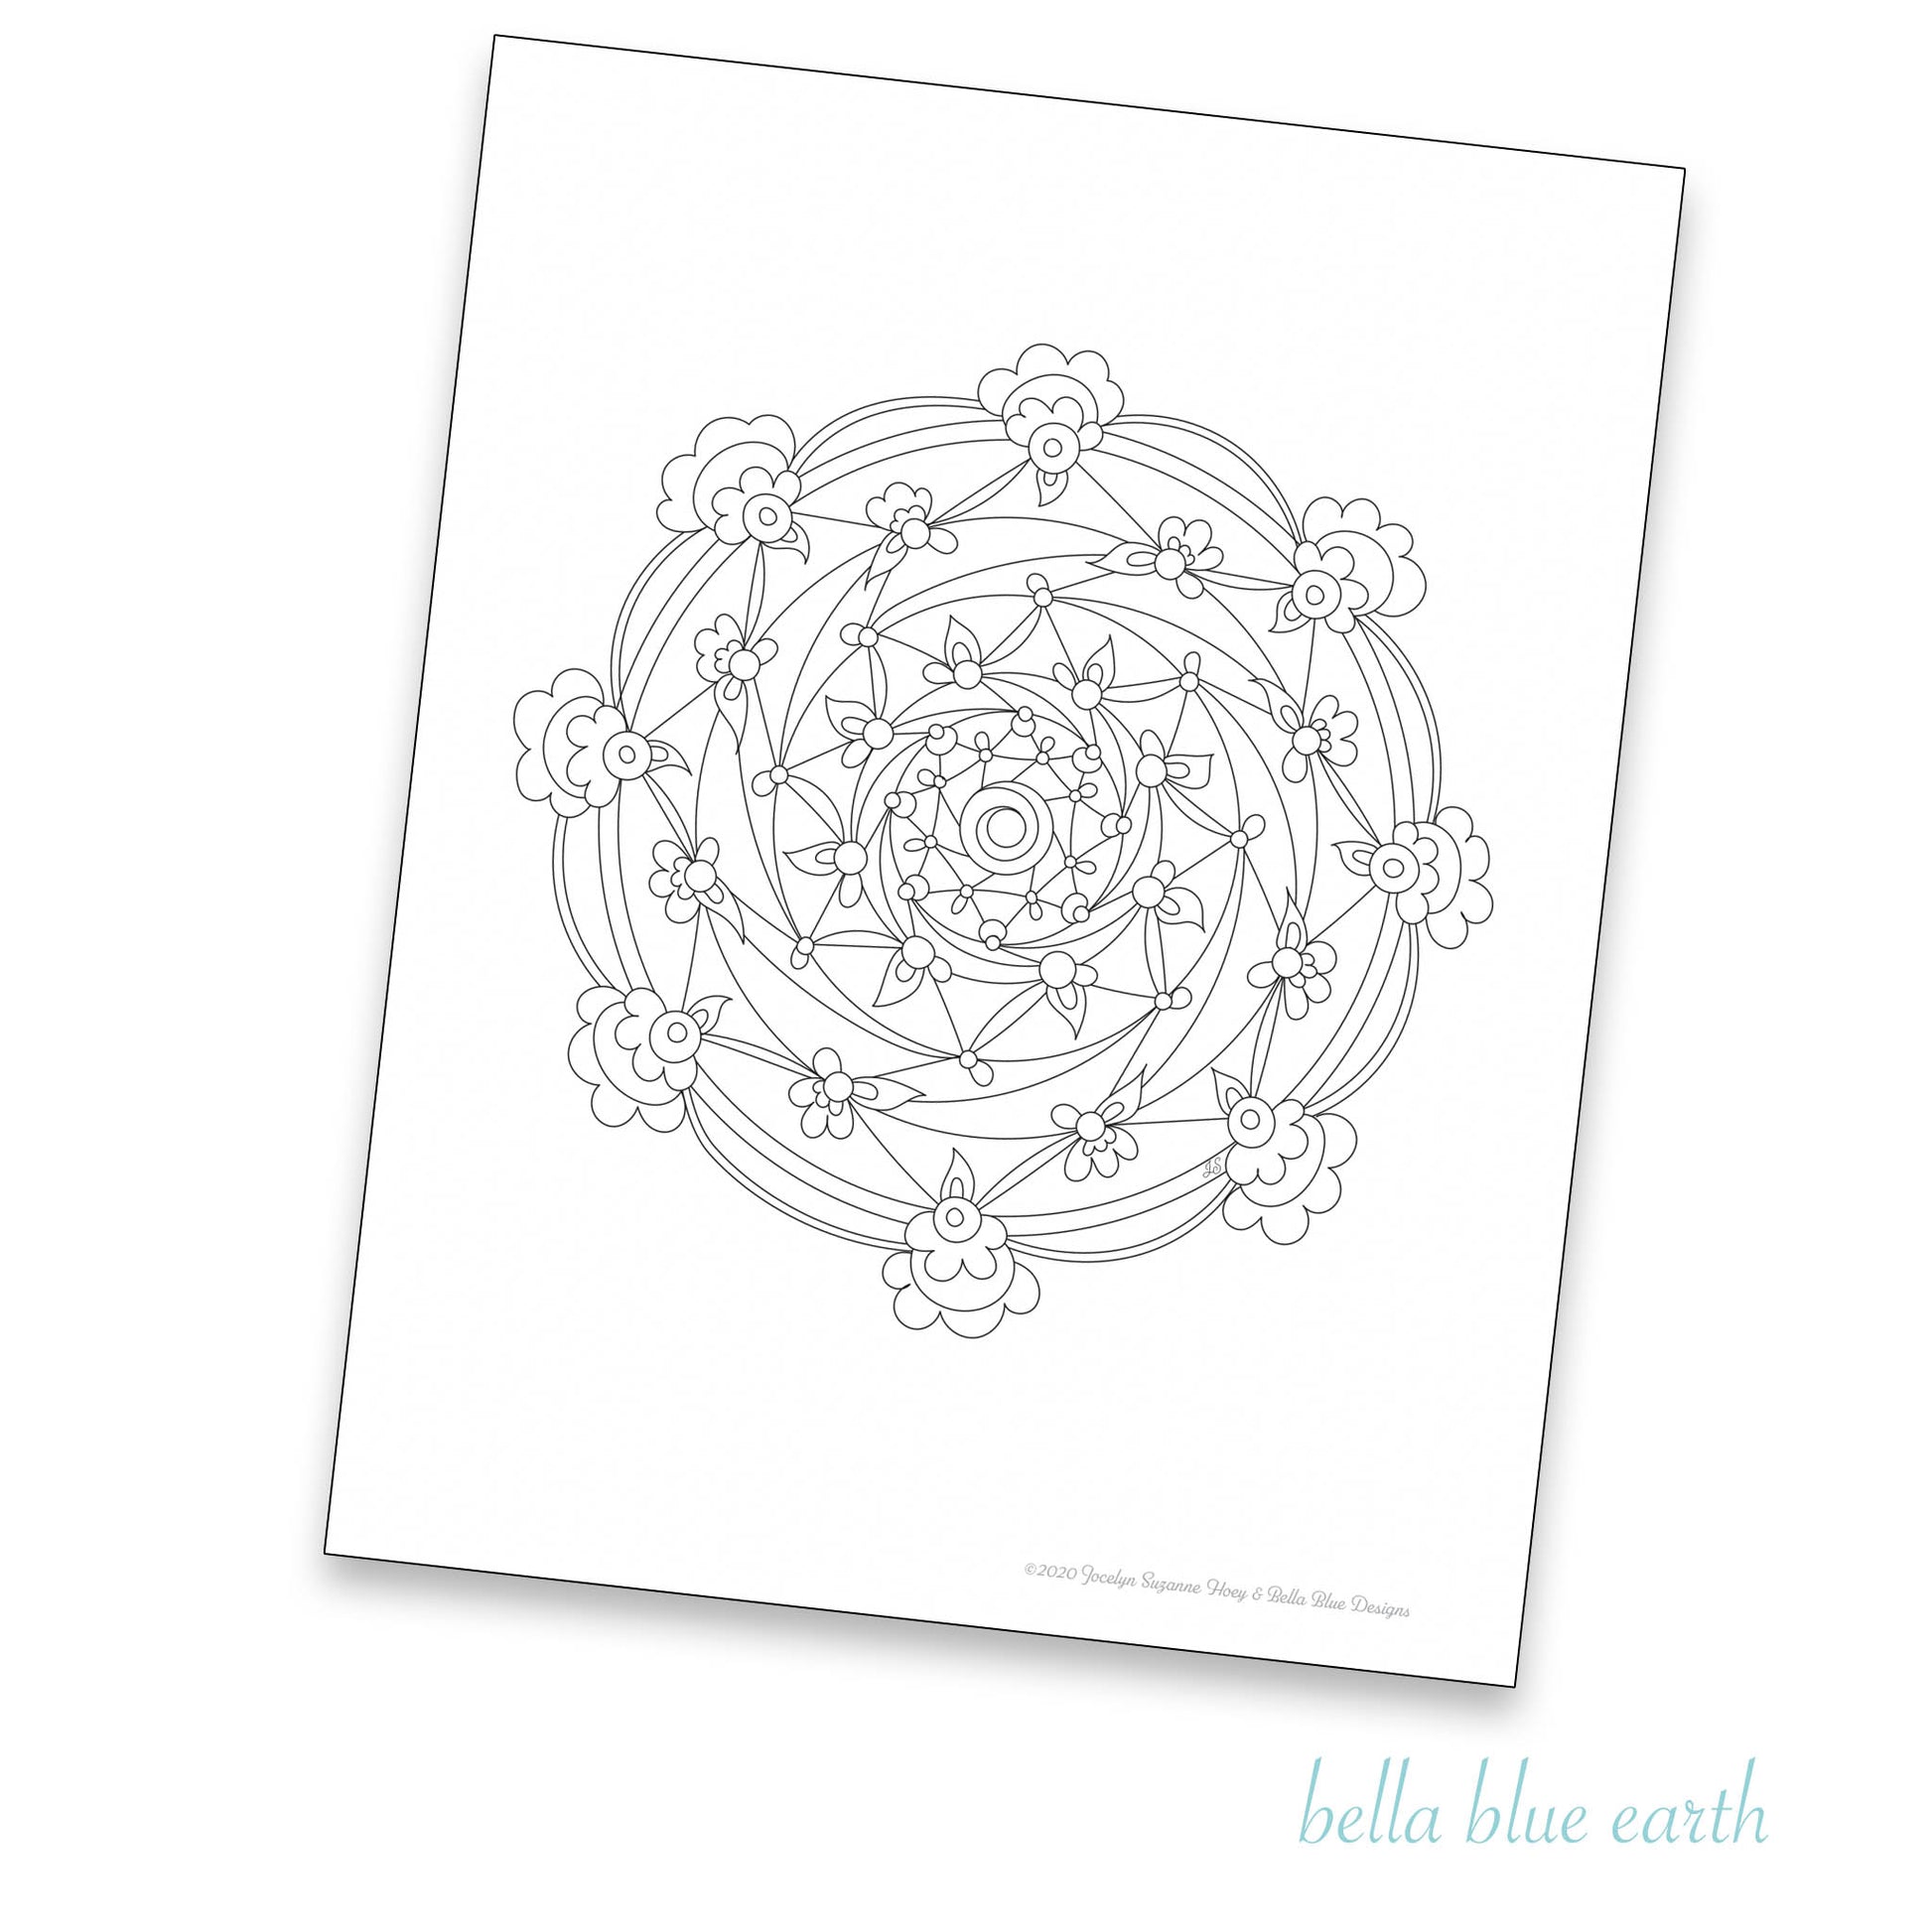 A mandala style illustration for coloring book